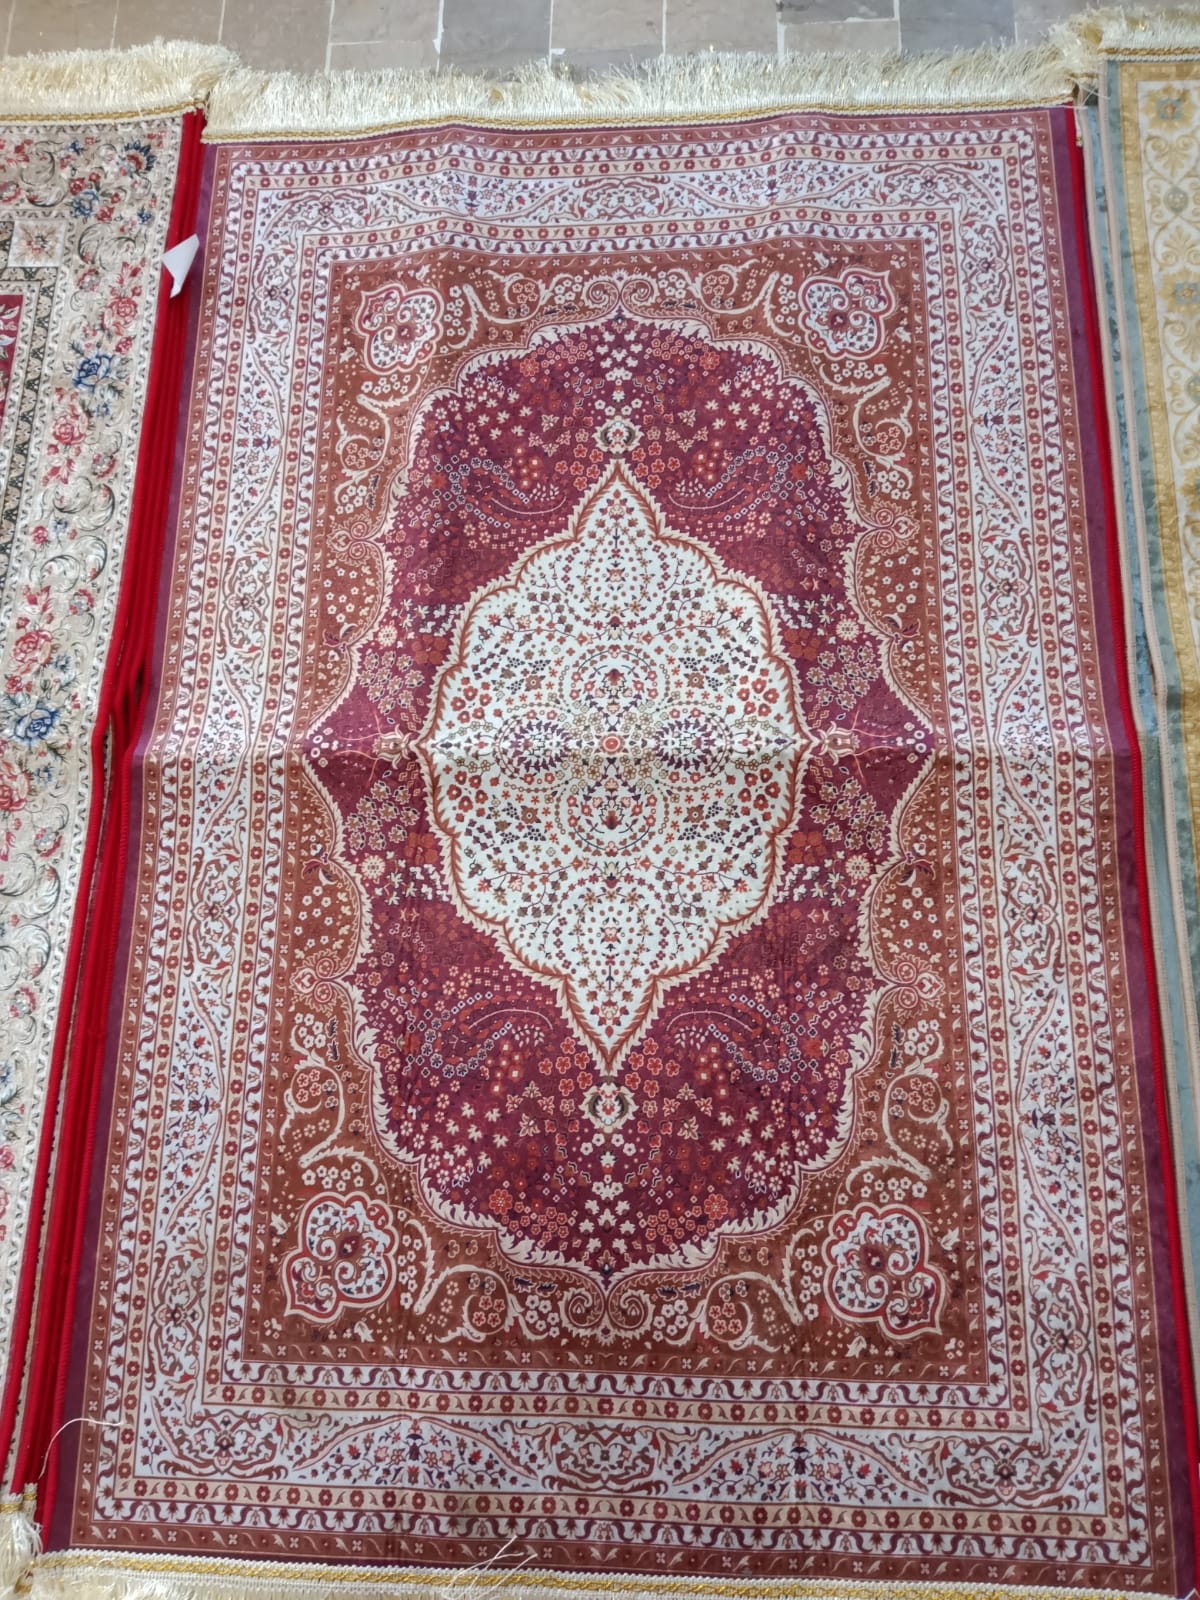 Prayer Mats China Qaleen jumbo size , Comfortable and High Quality Prayer mats. Available in different colors and designs. Order yours now from our website.